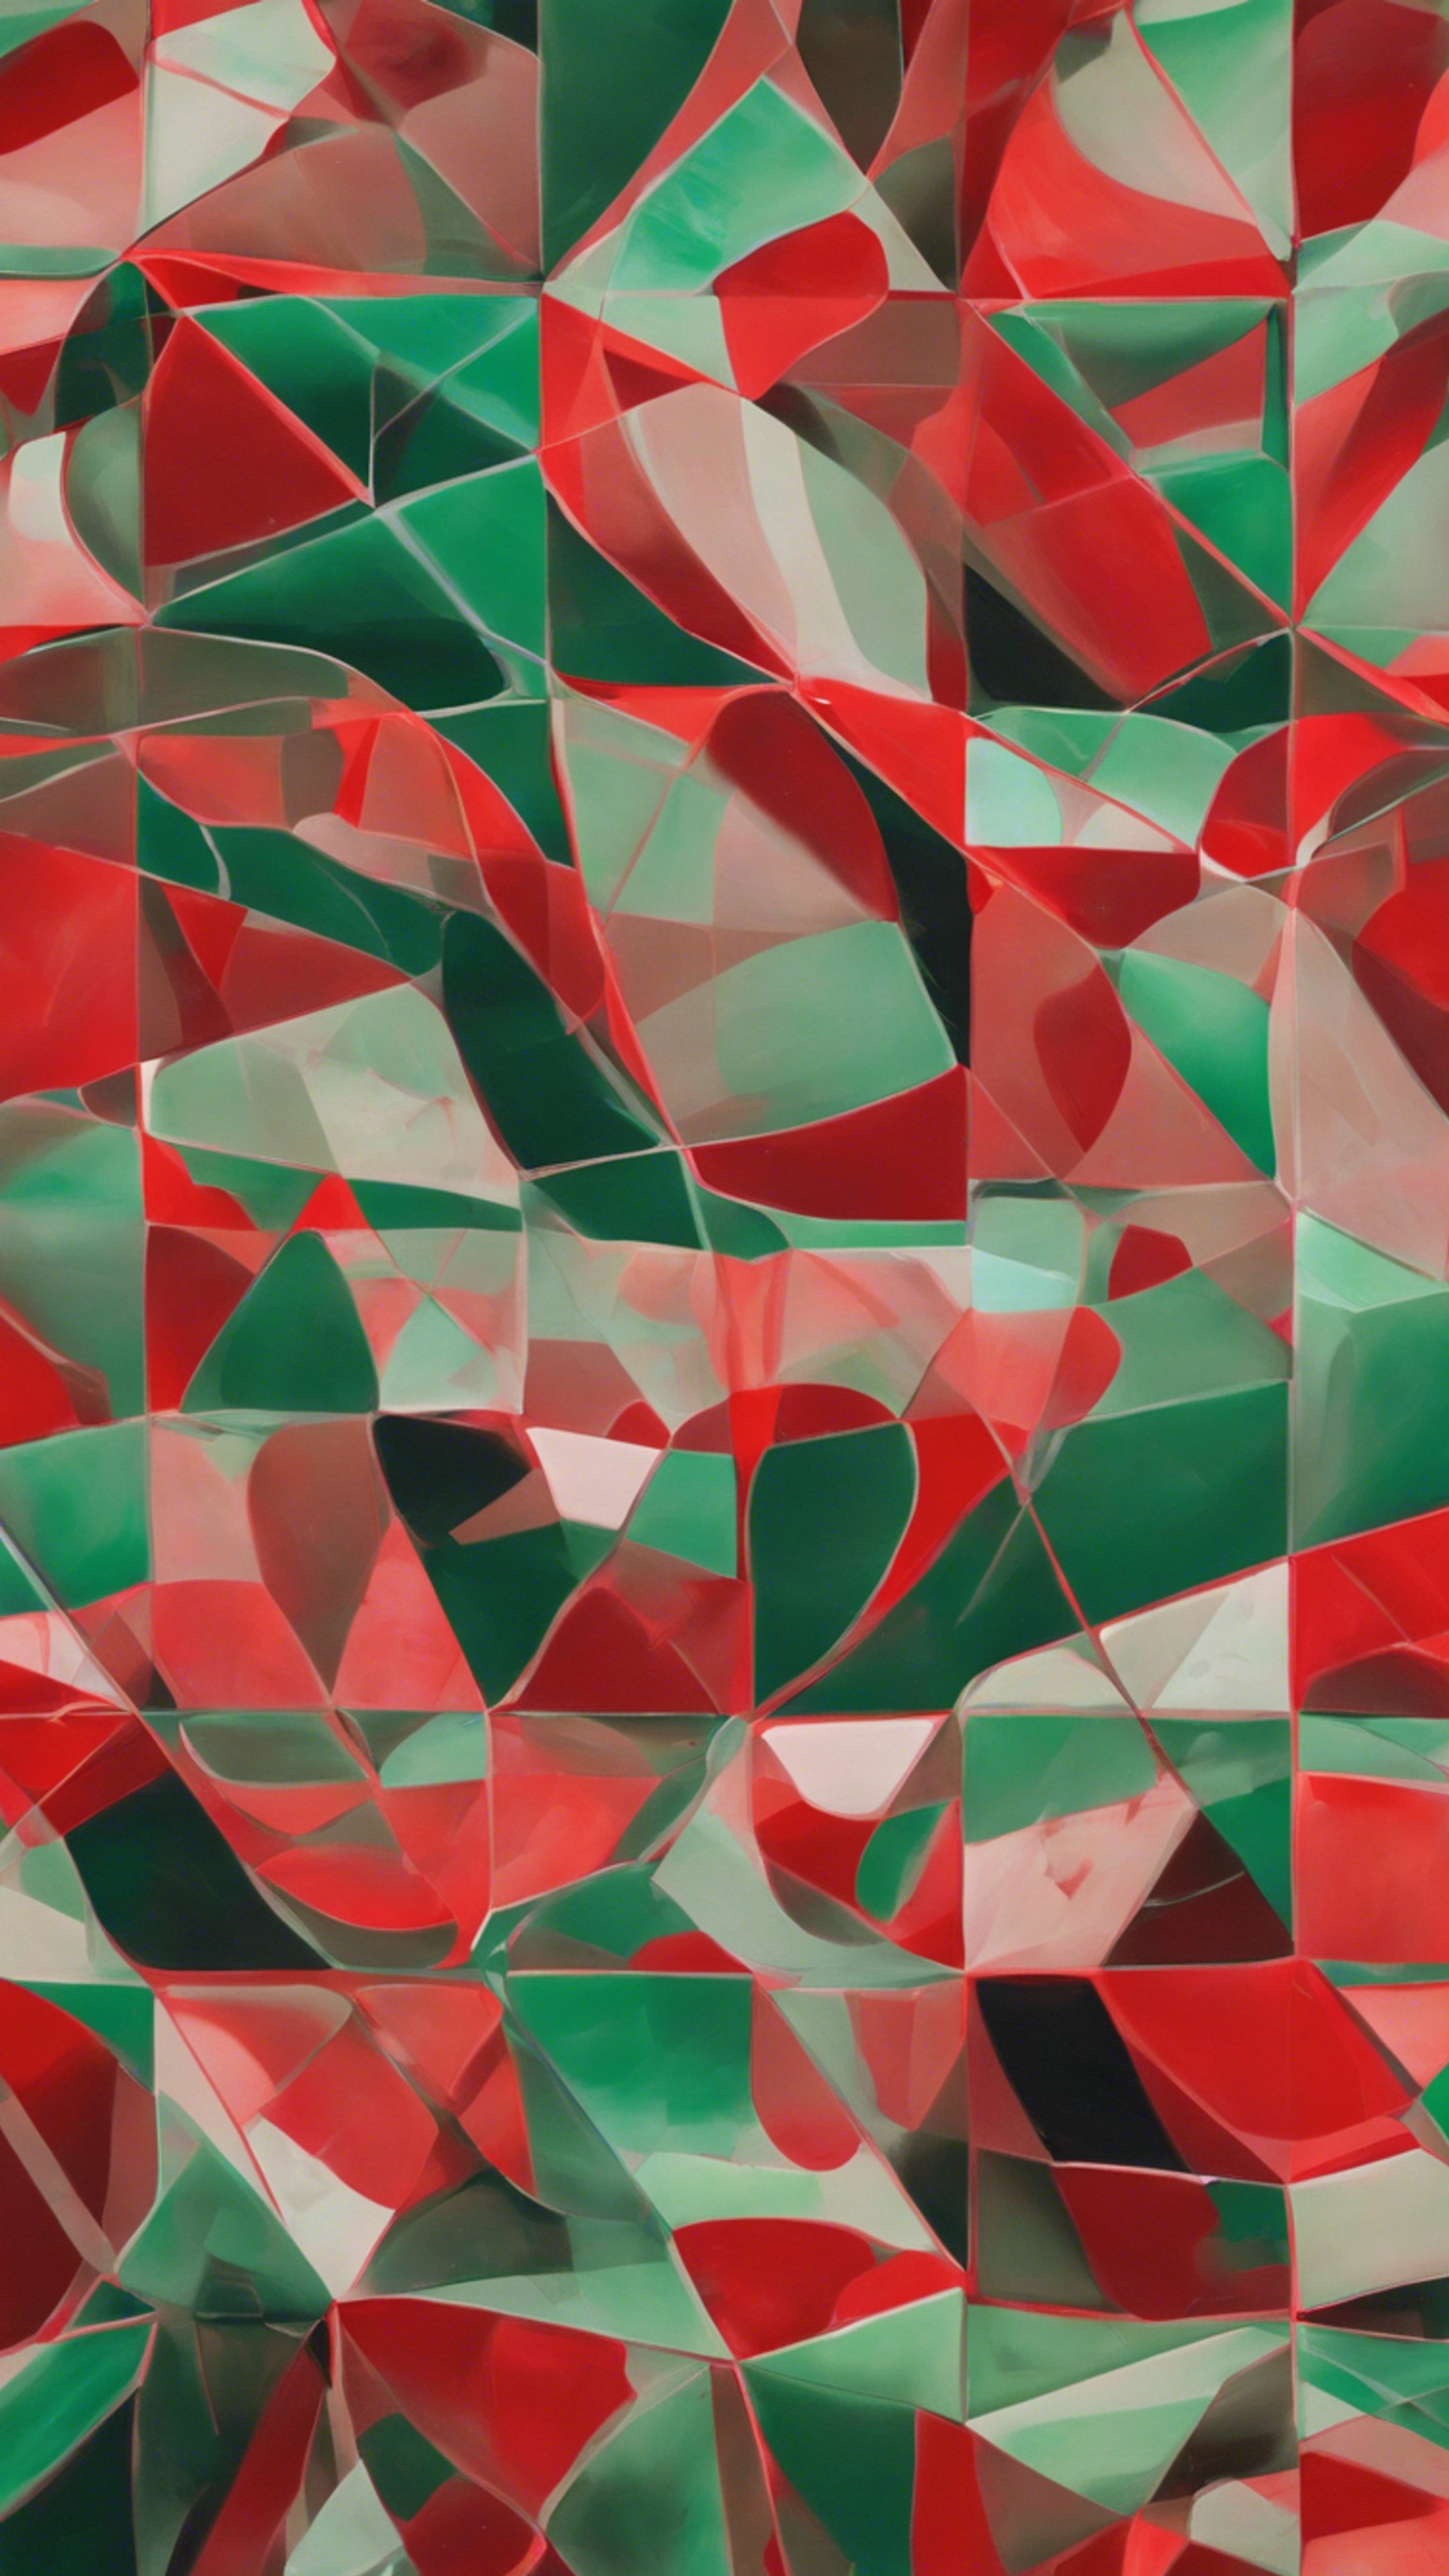 A modernist painting of red and green geometrical shapes, seamless in their connection Tapet[cfa3acf637214e6a9239]